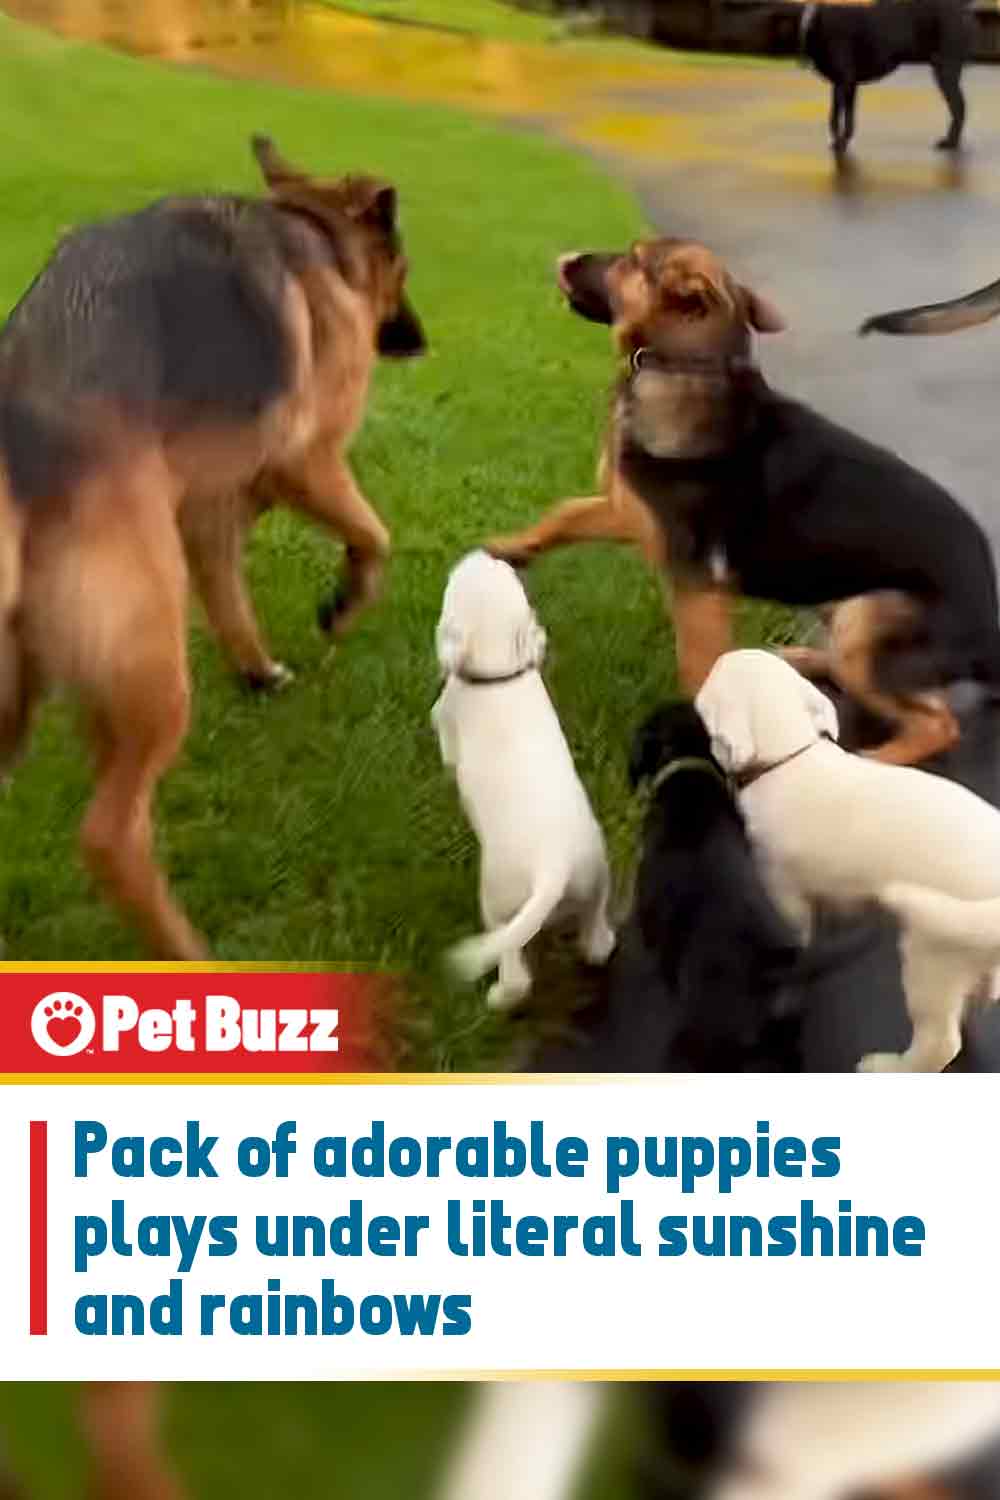 Pack of adorable puppies plays under literal sunshine and rainbows